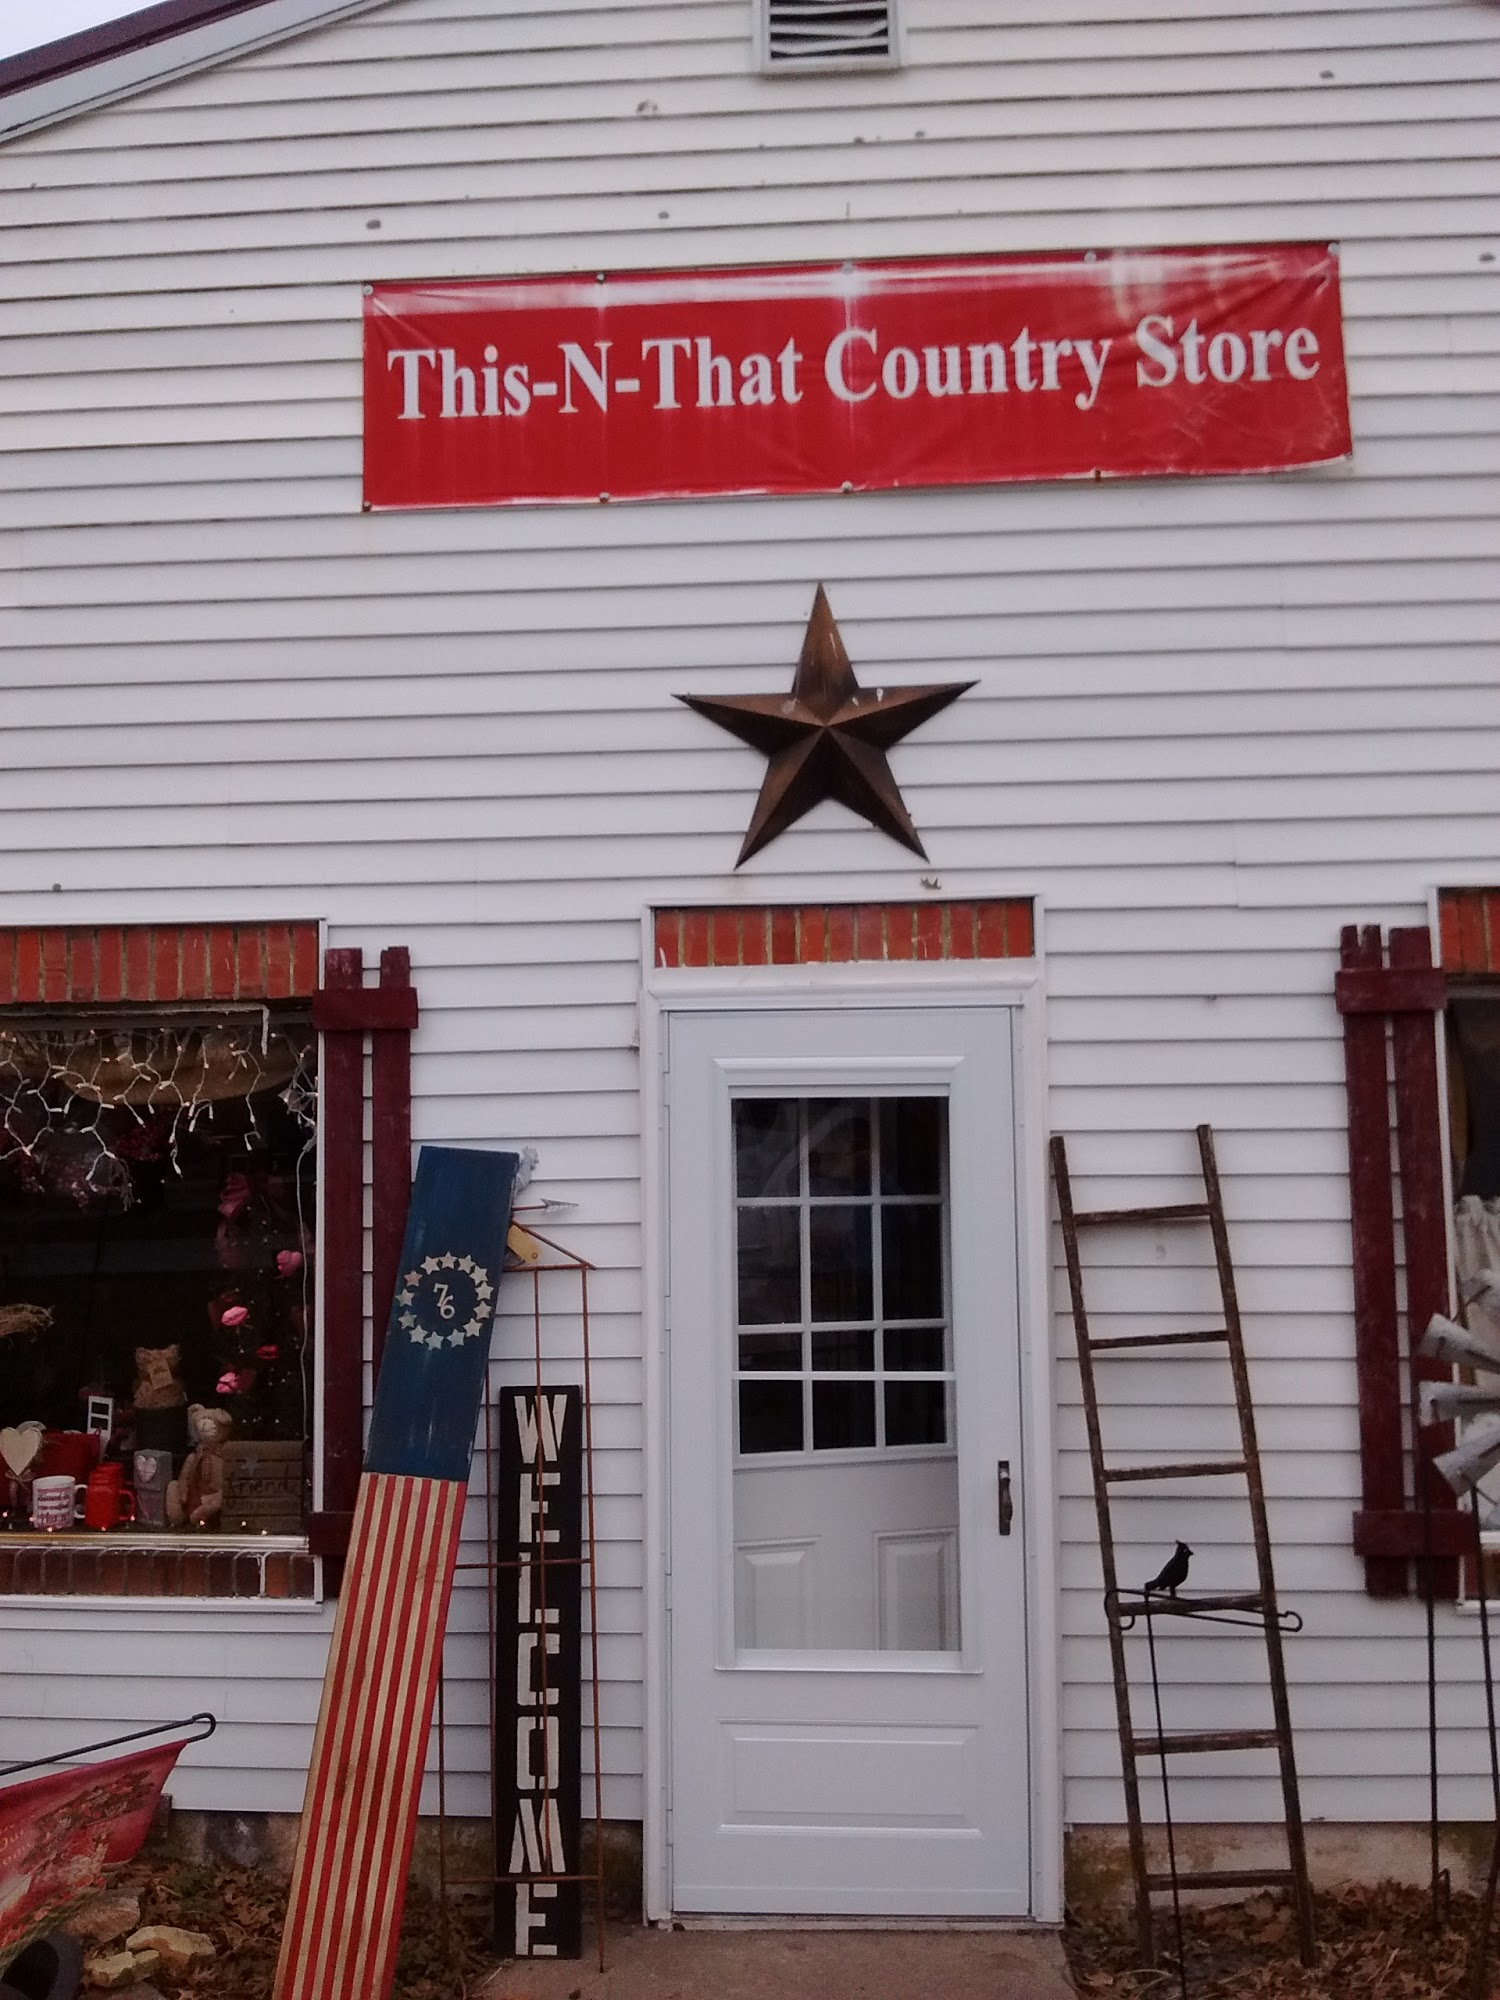 This-N-That Country Store